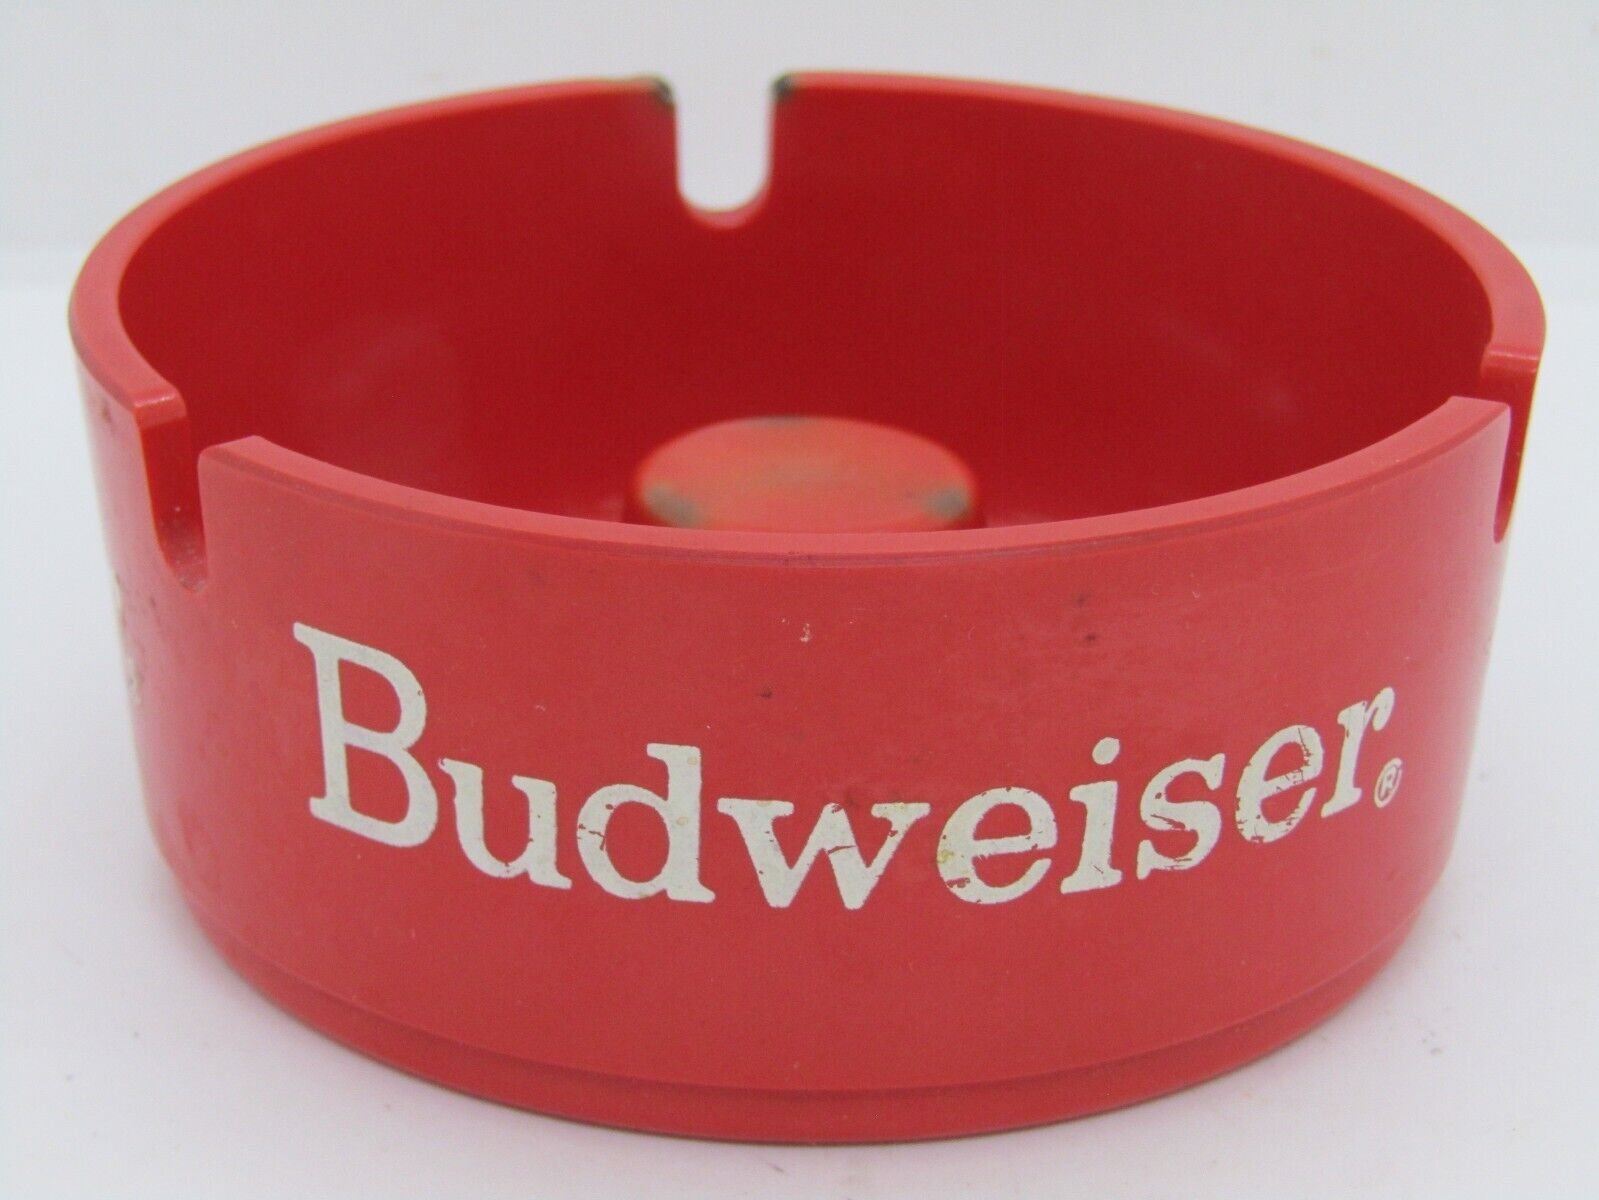 VINTAGE BUDWEISER ASHTRAY RED PLASTIC 3 SLOT COLLECTABLE 